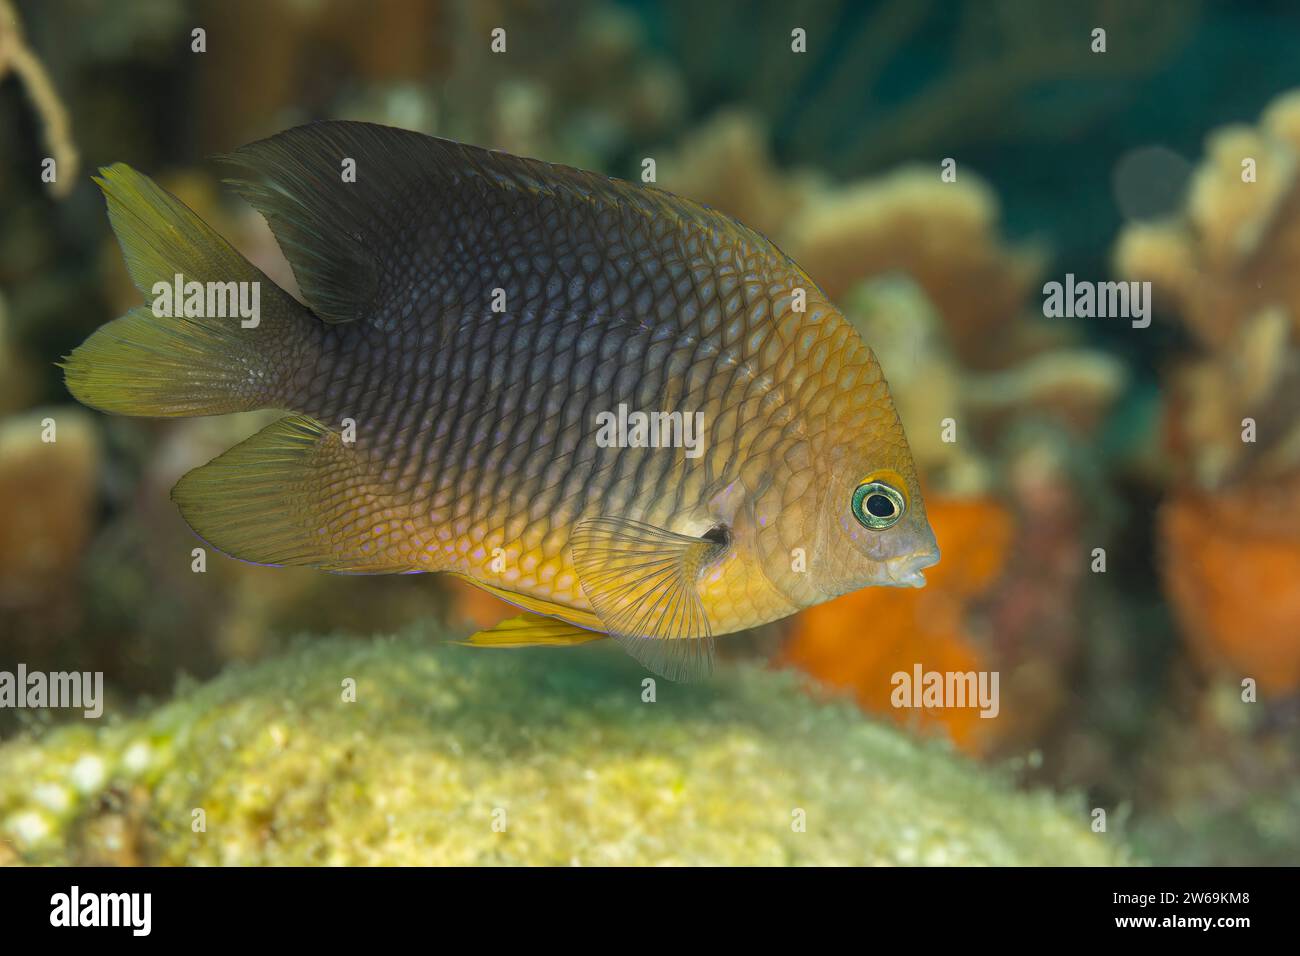 Striking image of a Yellowtail Damselfish, scientifically known as Stegastes planifrons, captured in its natural habitat within a coral reef Stock Photo